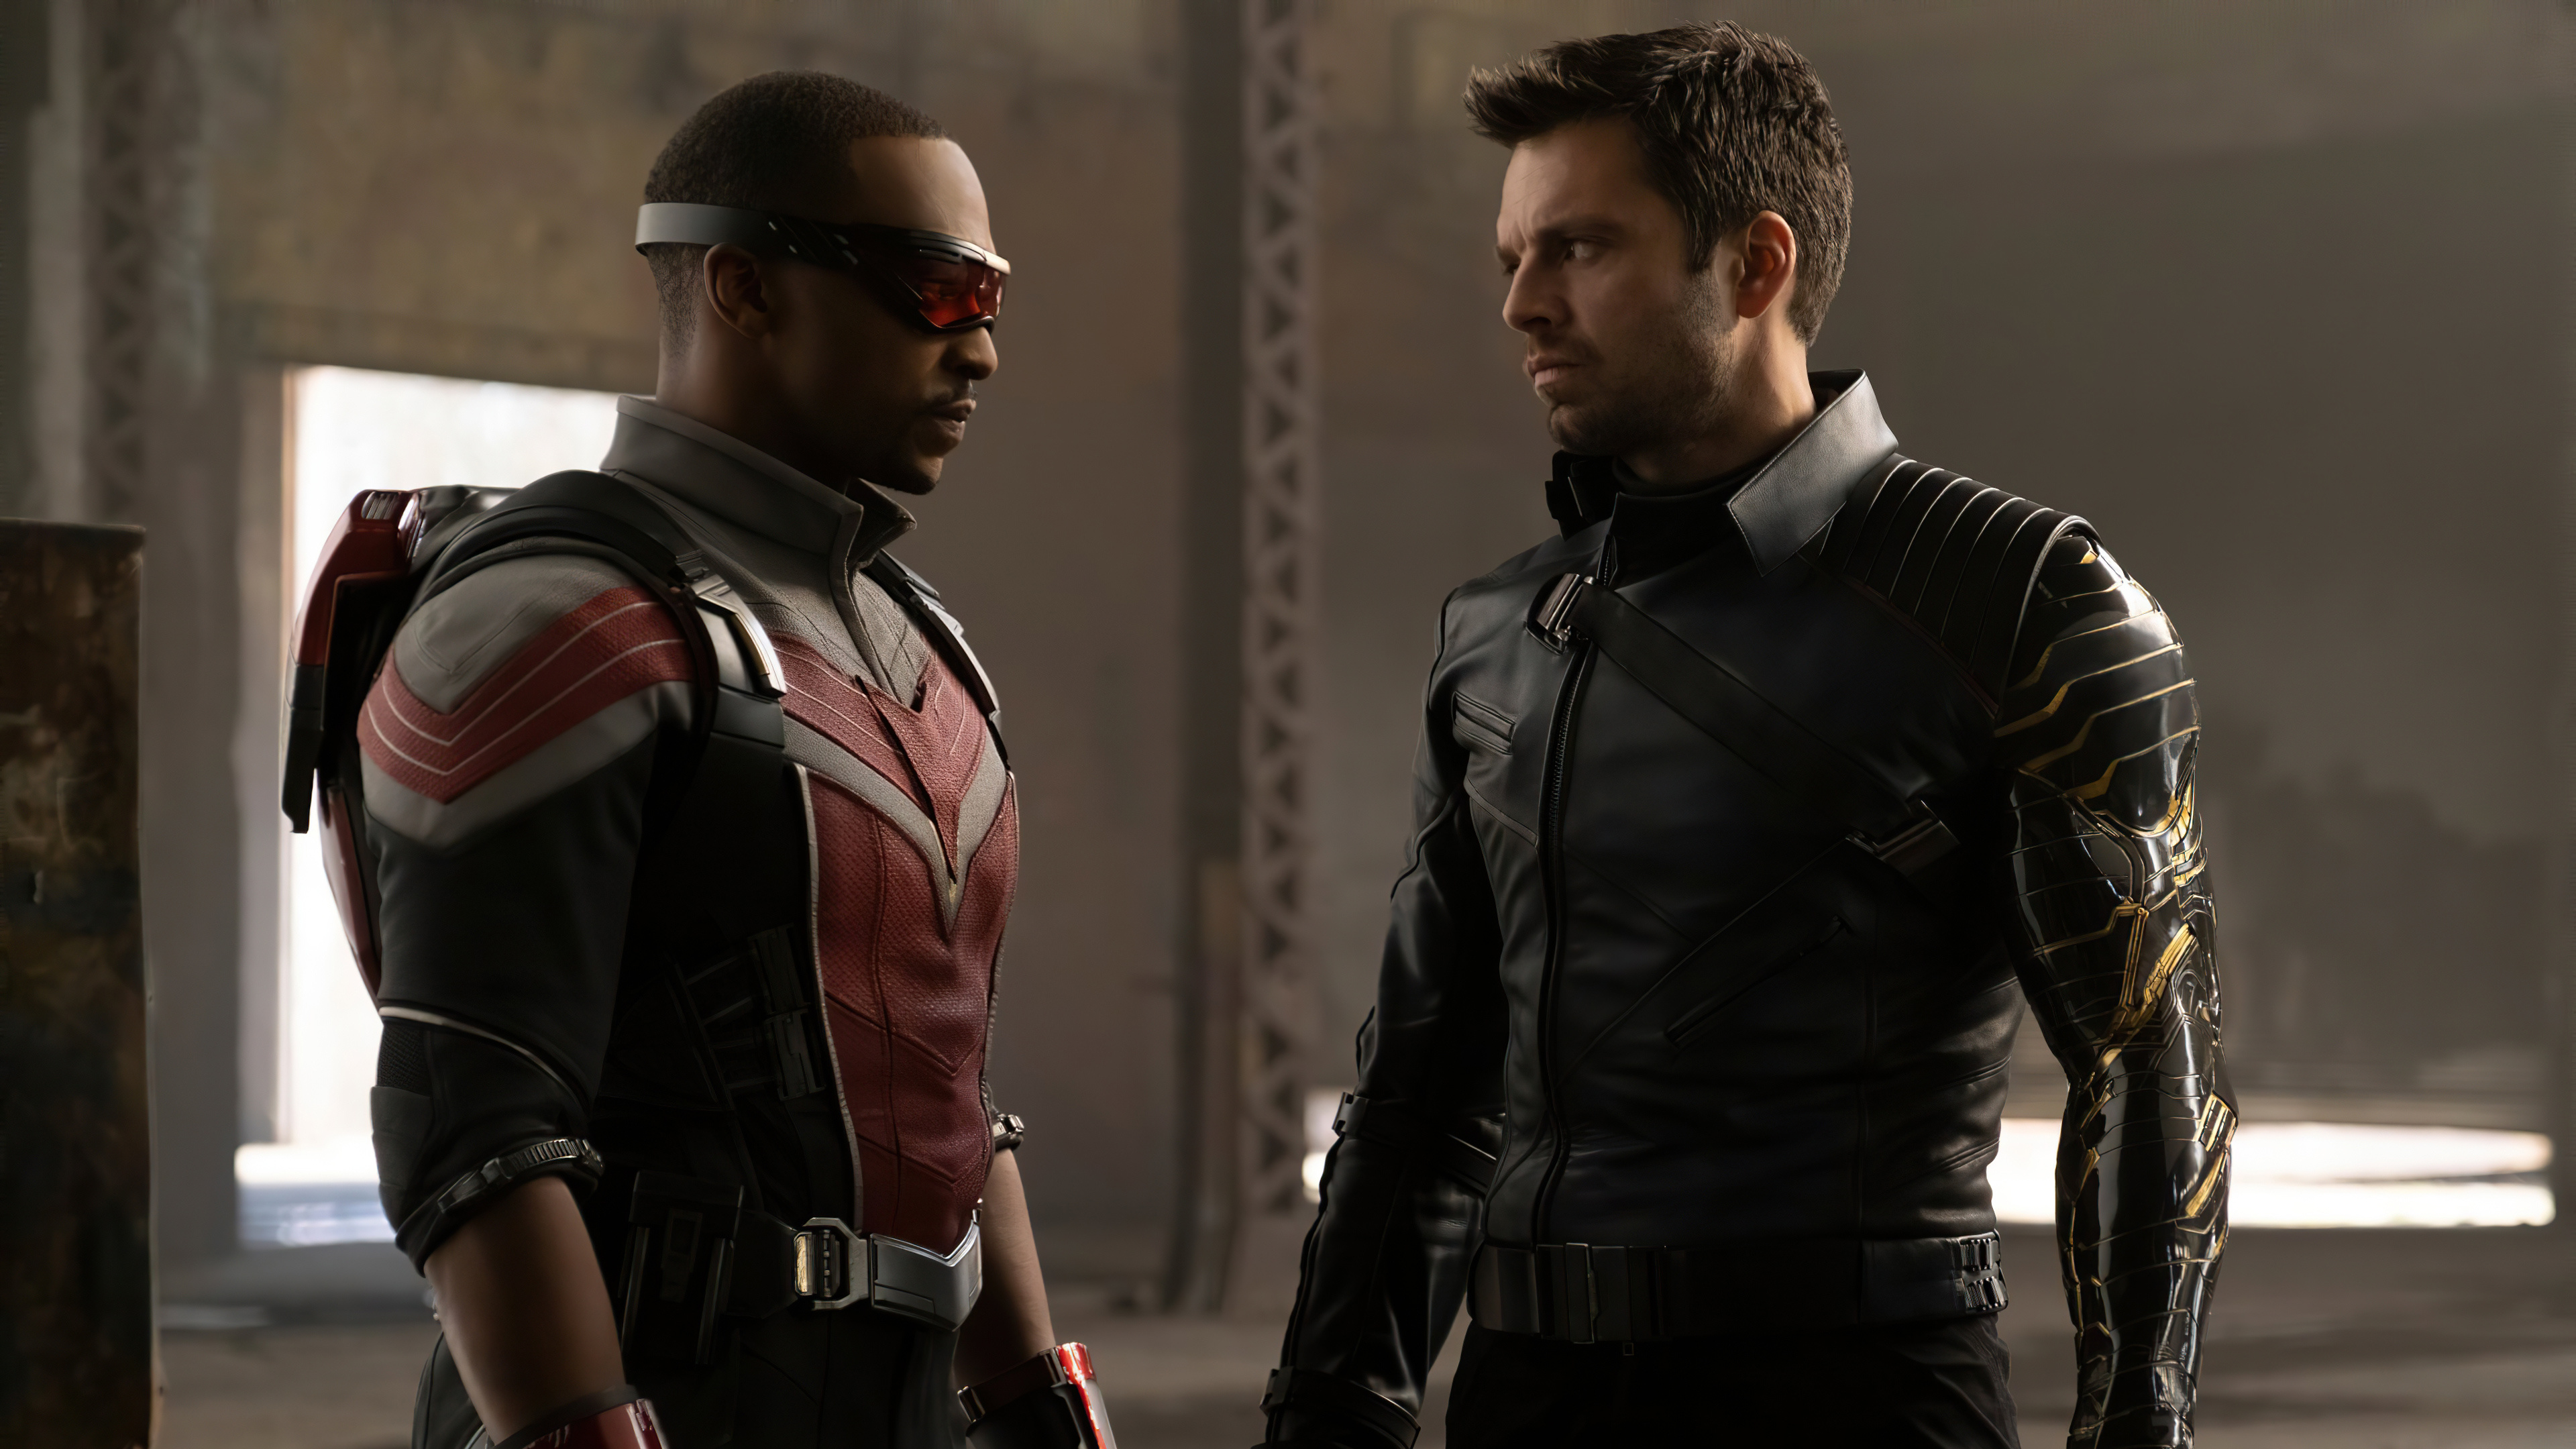 The Falcon and the Winter Soldier TV series, HD wallpapers, TV show images, 3840x2160 4K Desktop